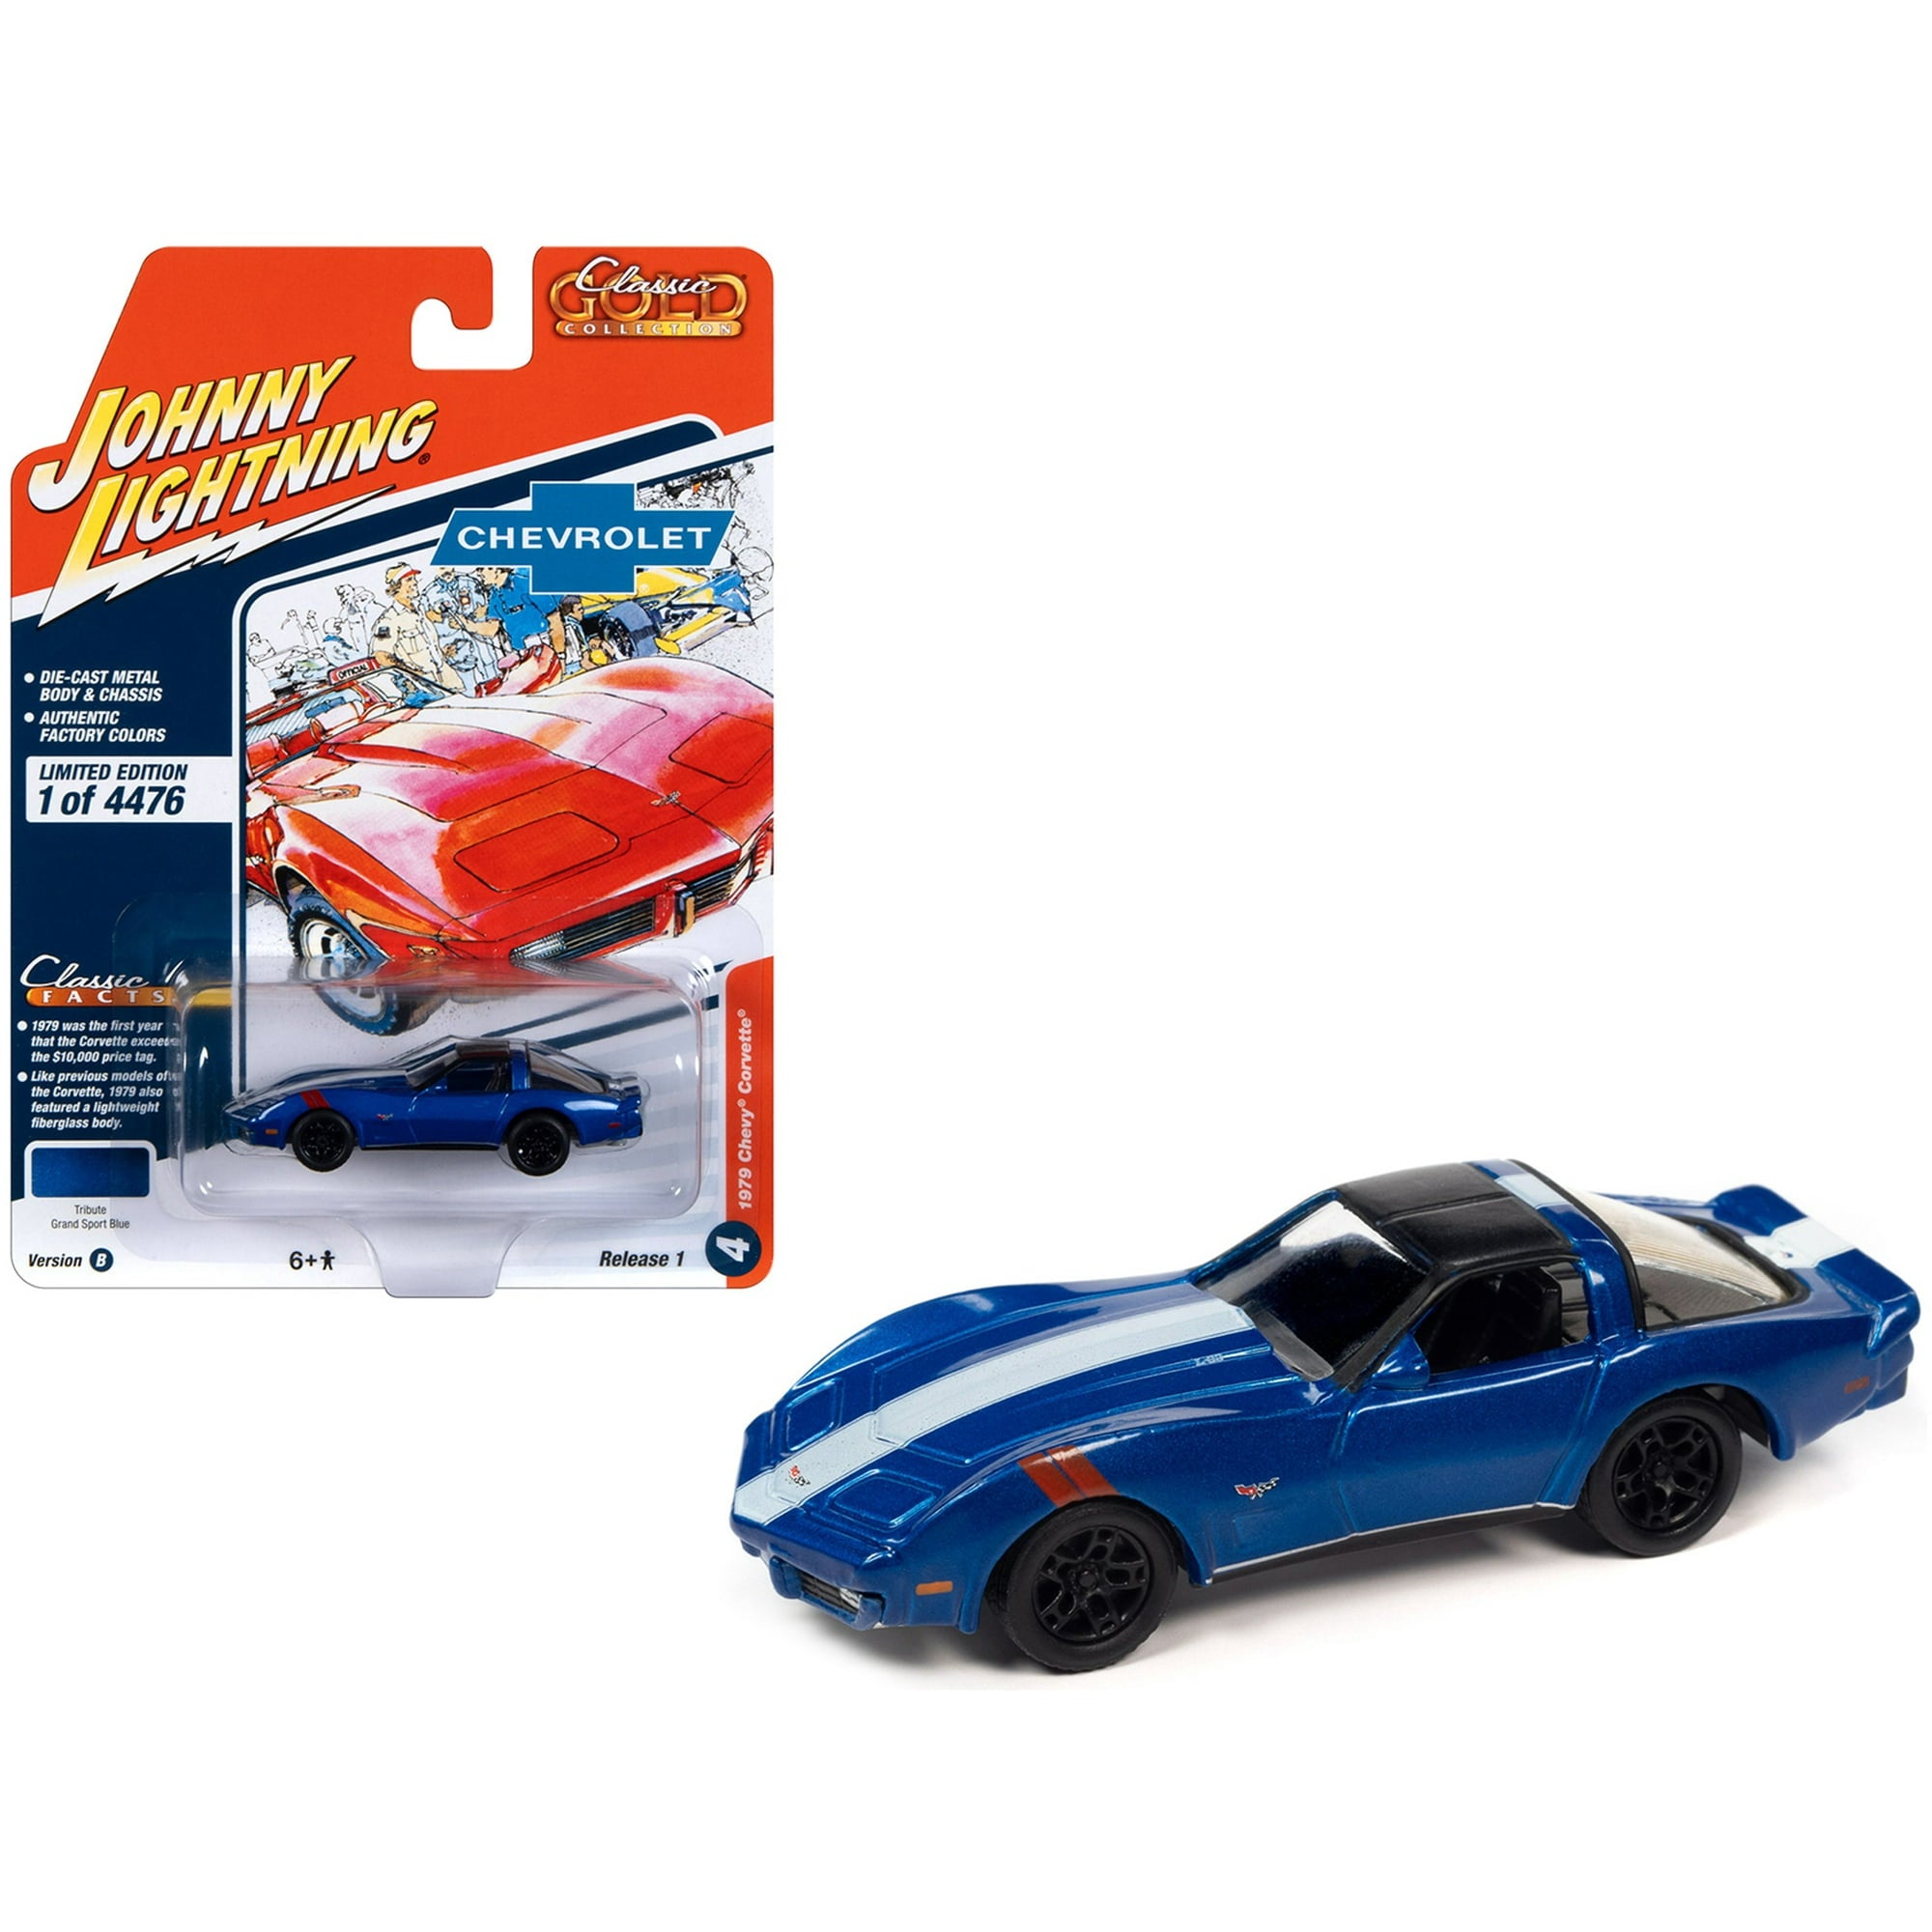 1/64 1979 CHEVY CORVETTE SPORT BLUE METALLIC W/WHITE STRIPE AND BLACK TOP - JOHNNY LIGHTNING CLASSIC GOLD COLLECTION